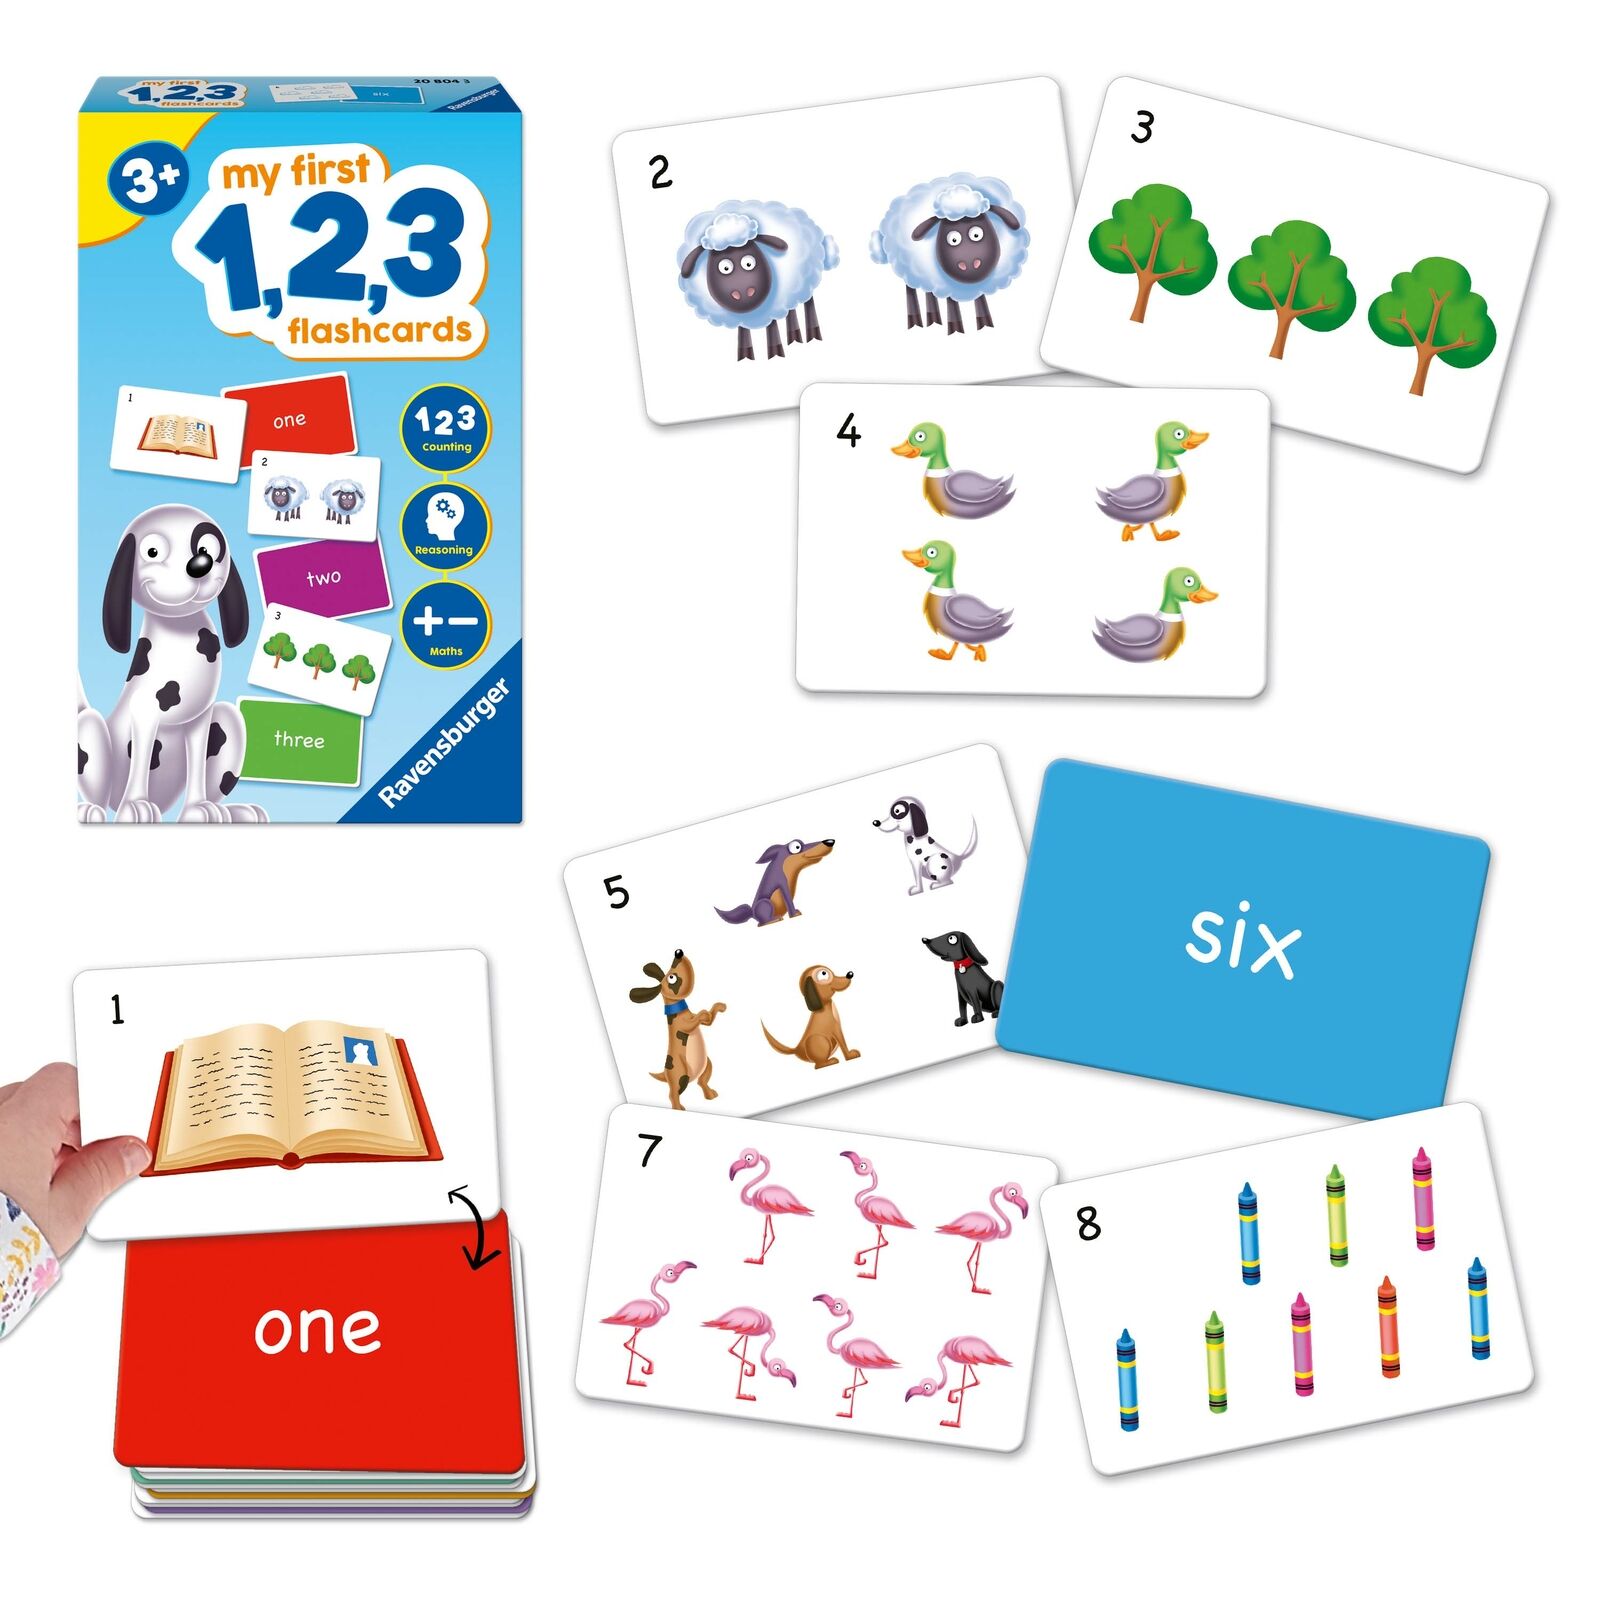 20804 Ravensburger My First 1,2,3 Flash Cards Number Game Children Age 3 Years+